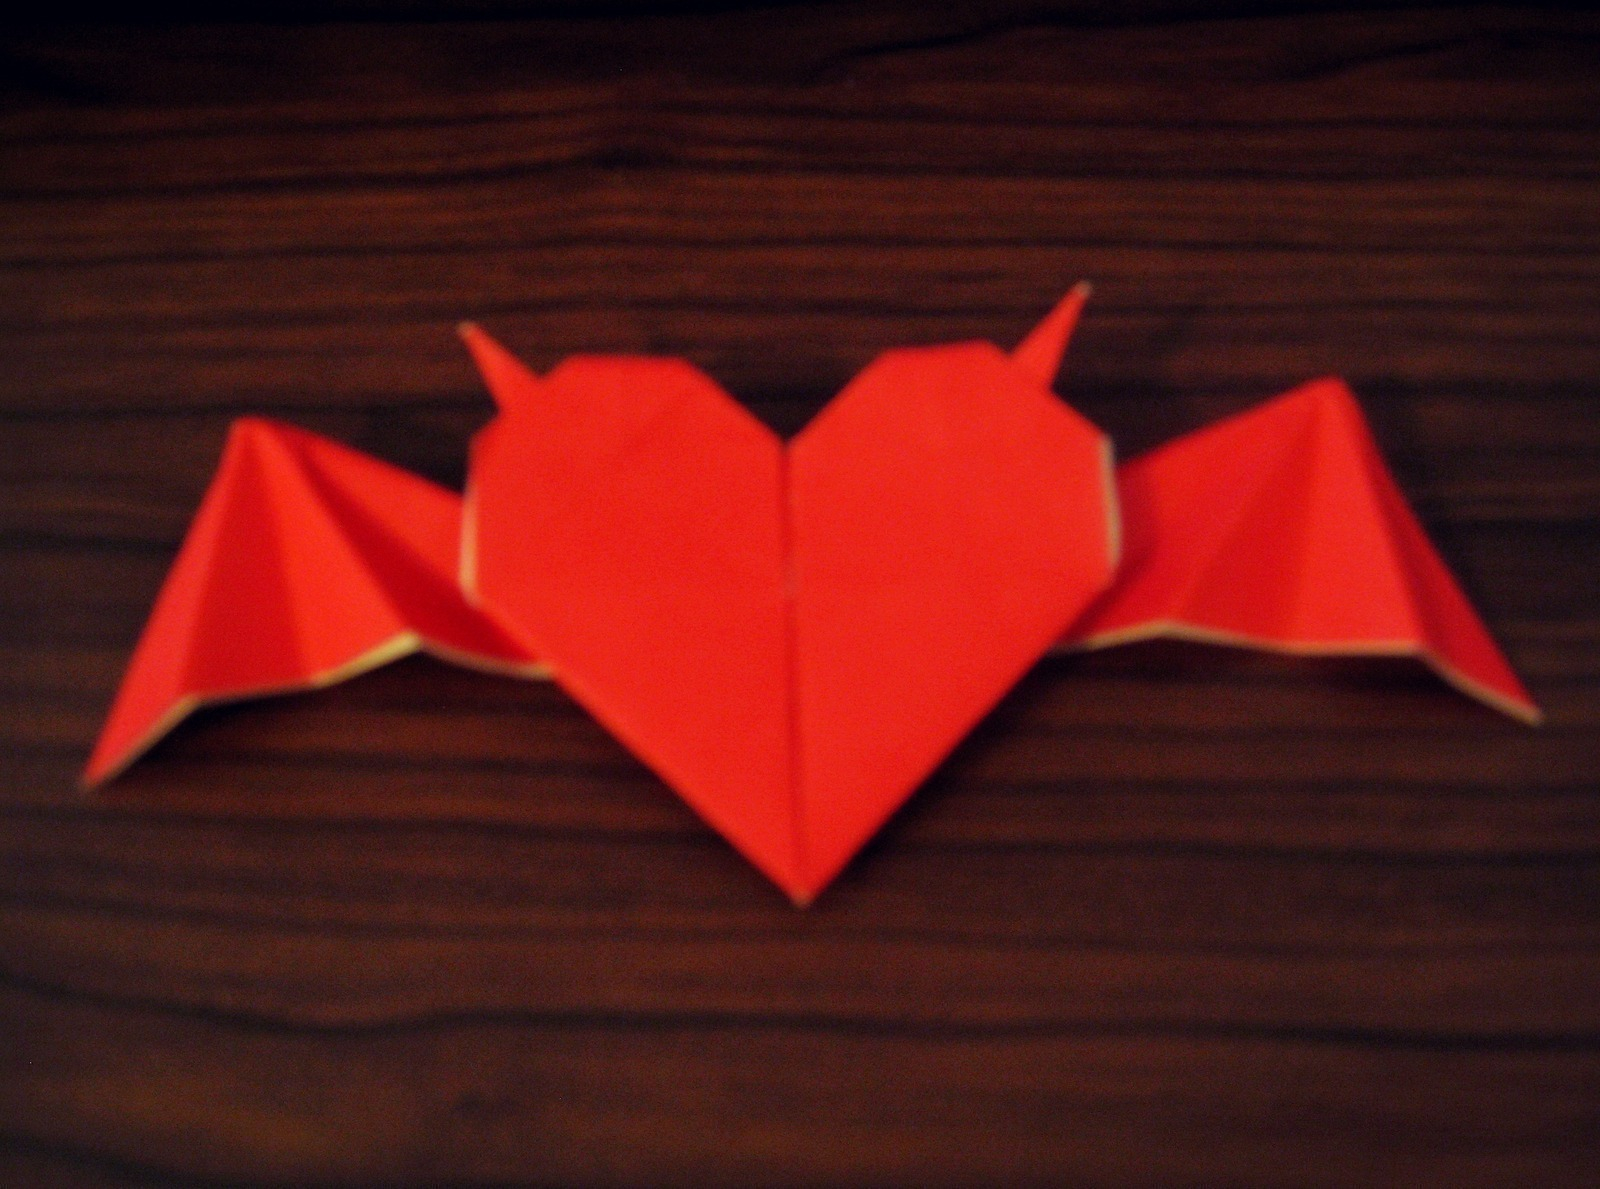 How To Make An Origami Heart Origami Heart With Horns And Bat Wings How To Fold An Origami